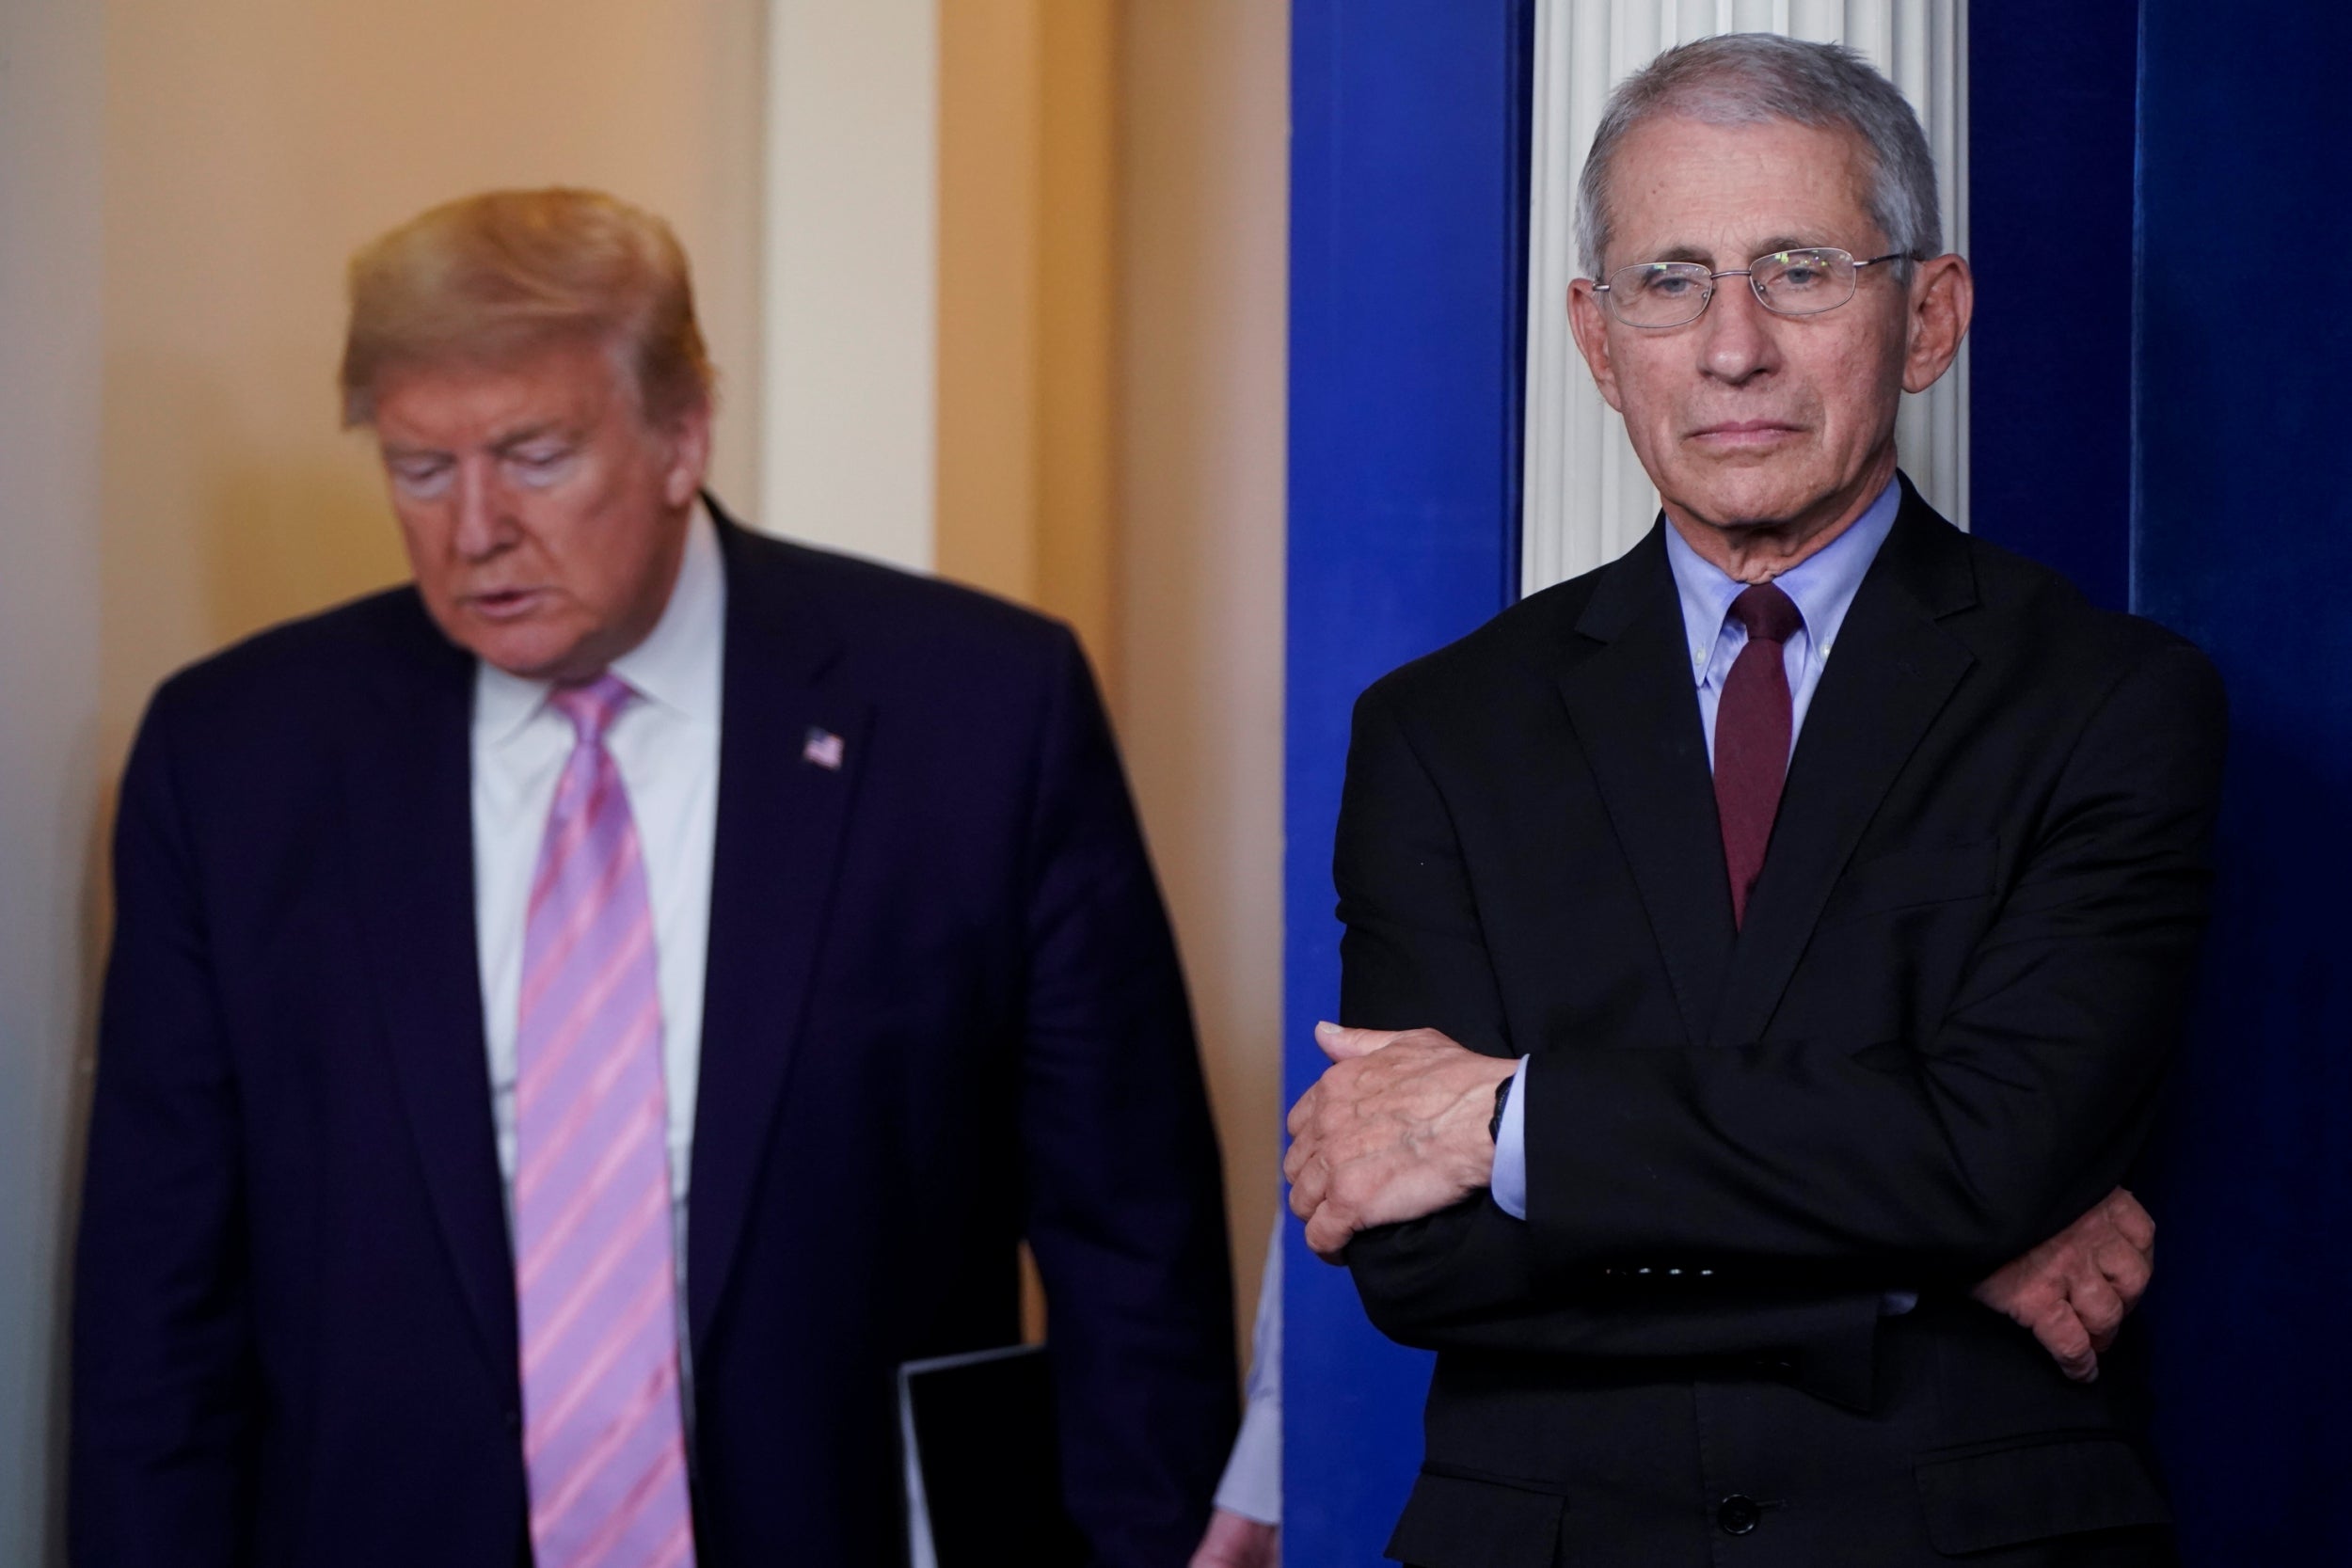 Donald Trump arrives for a White House briefing on the coronavirus pandemic as Anthony Fauci looks on